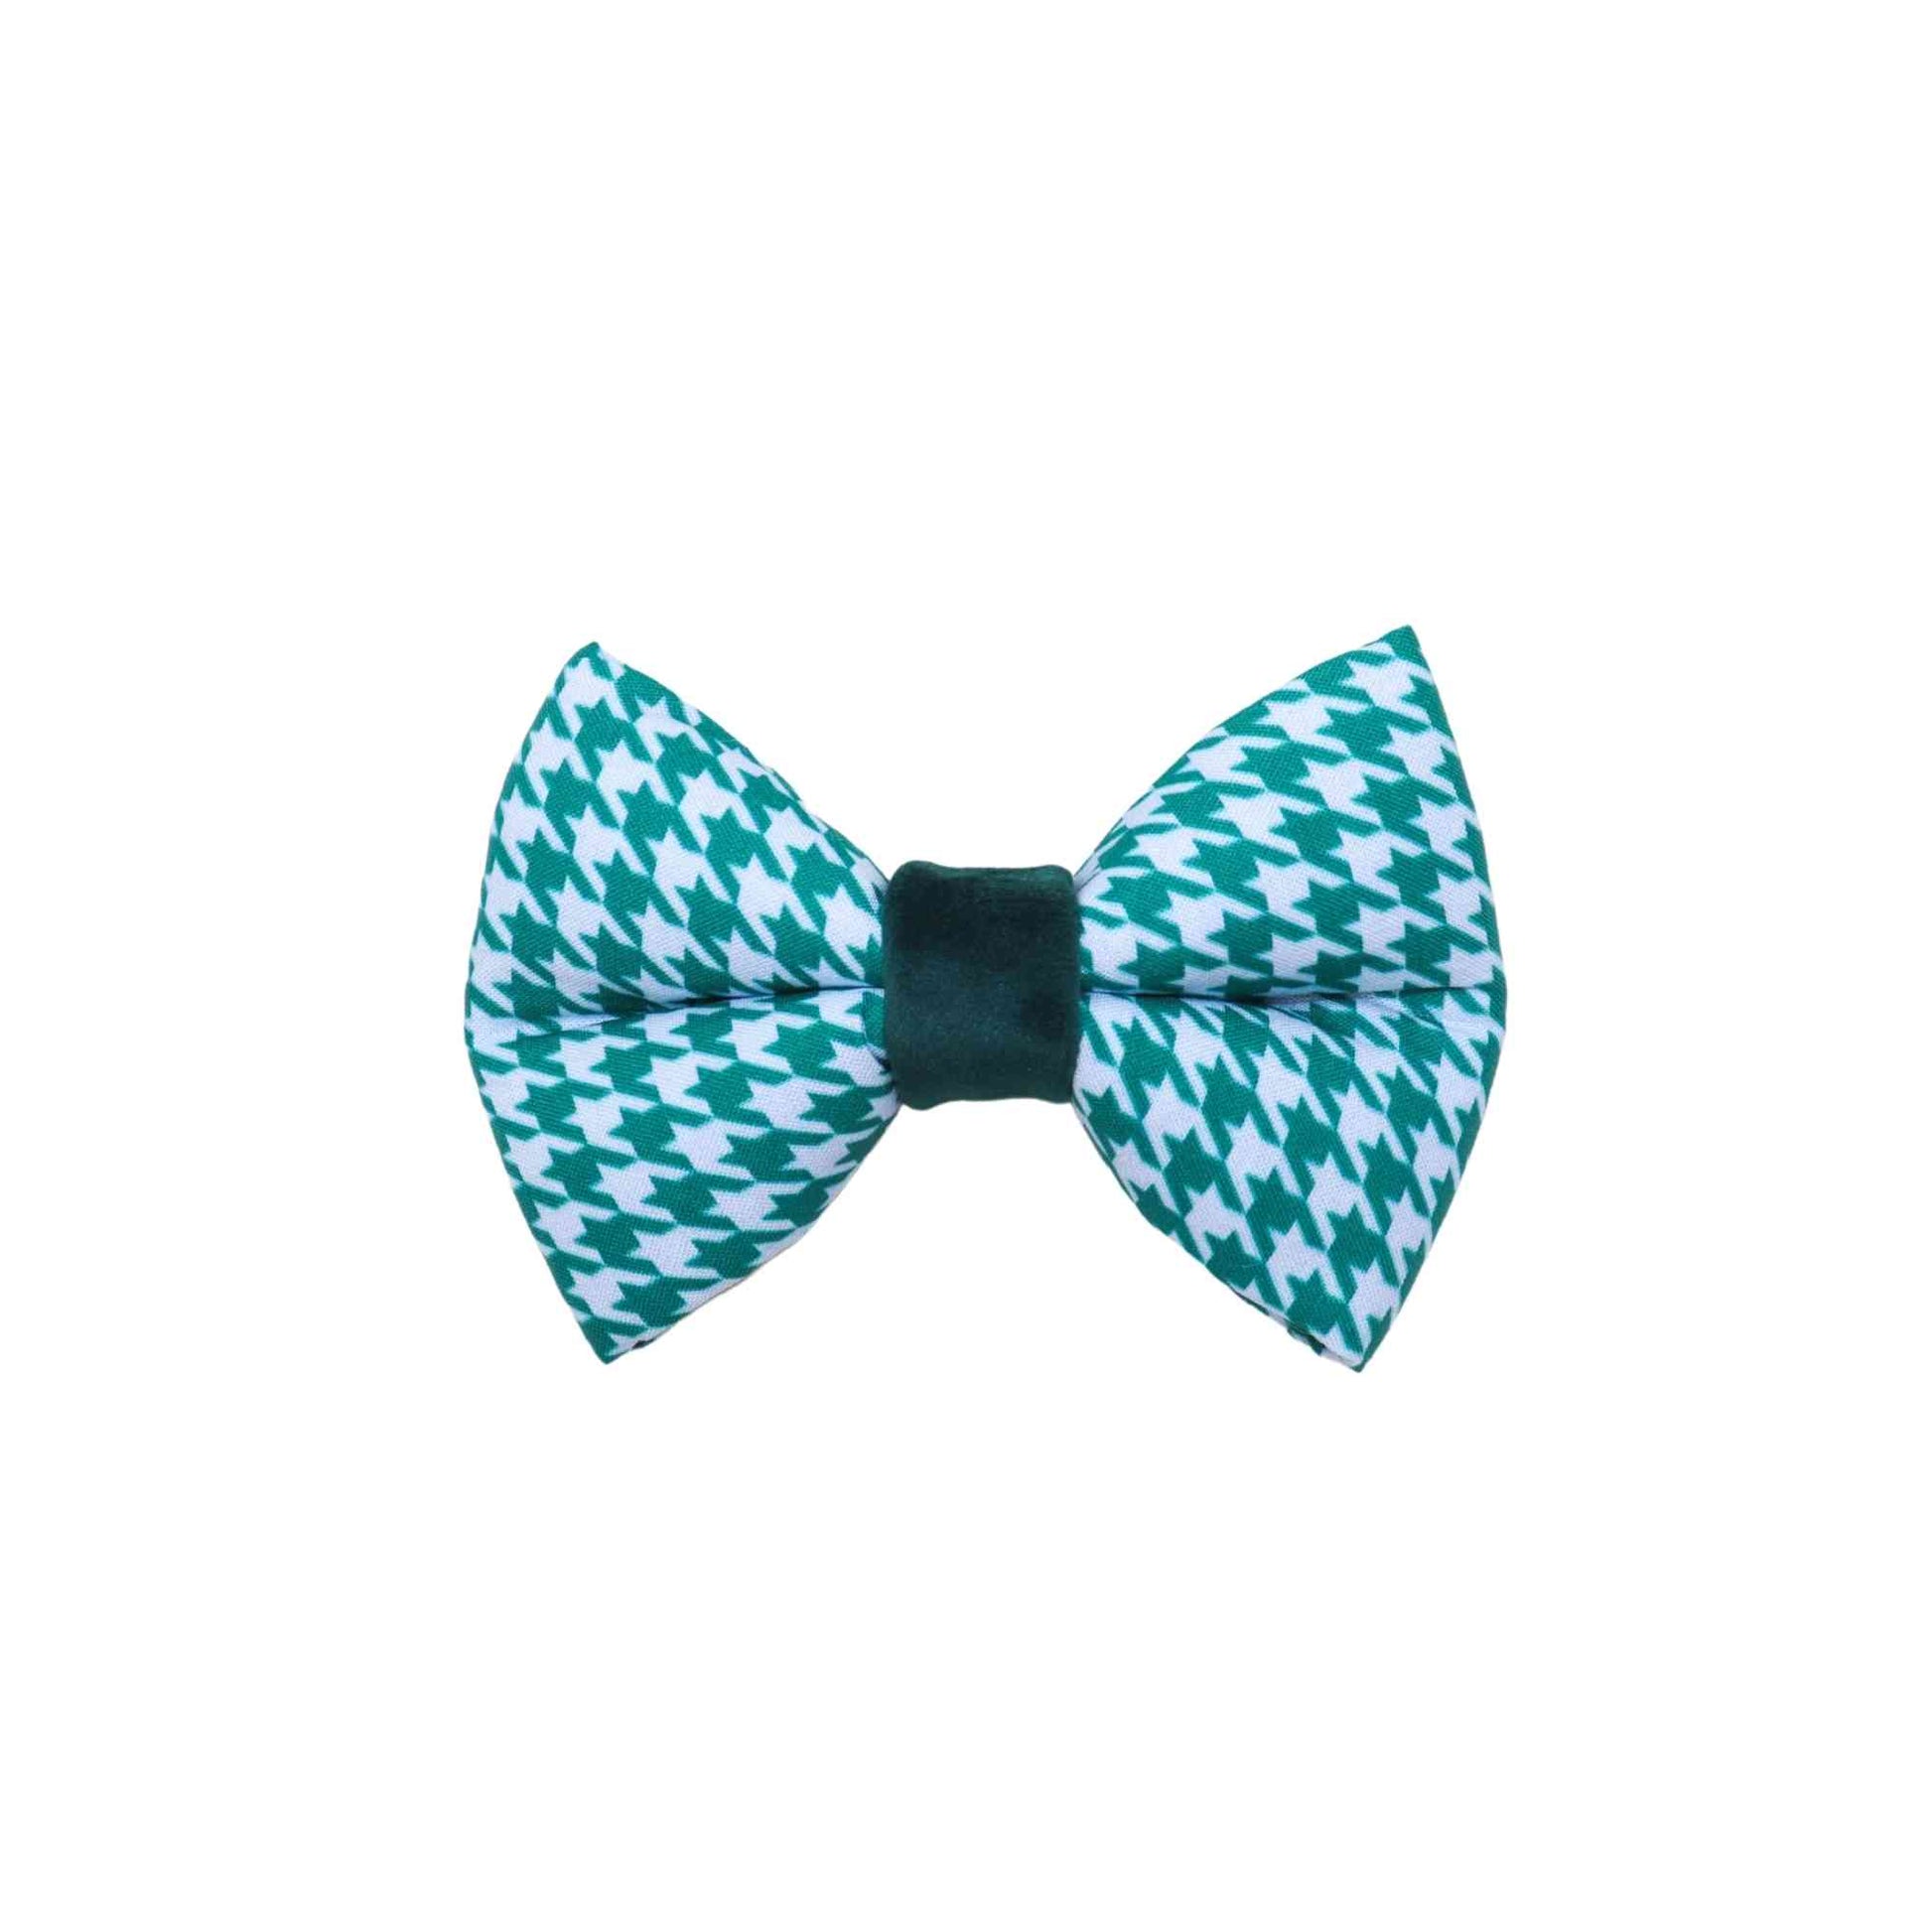 Dress up your furry companion with our green and blue houndstooth boy dog bow tie! Designed to fit over your pet's collar, our bow tie features two elastic loops that keep it securely in place. Available in small, medium, large, and extra-large sizes, our bow tie is perfect for dogs of all breeds and sizes. The houndstooth pattern adds a touch of style to any outfit, making it perfect for special occasions or everyday wear. Shop now and give your boy dog a stylish accessory he'll love!